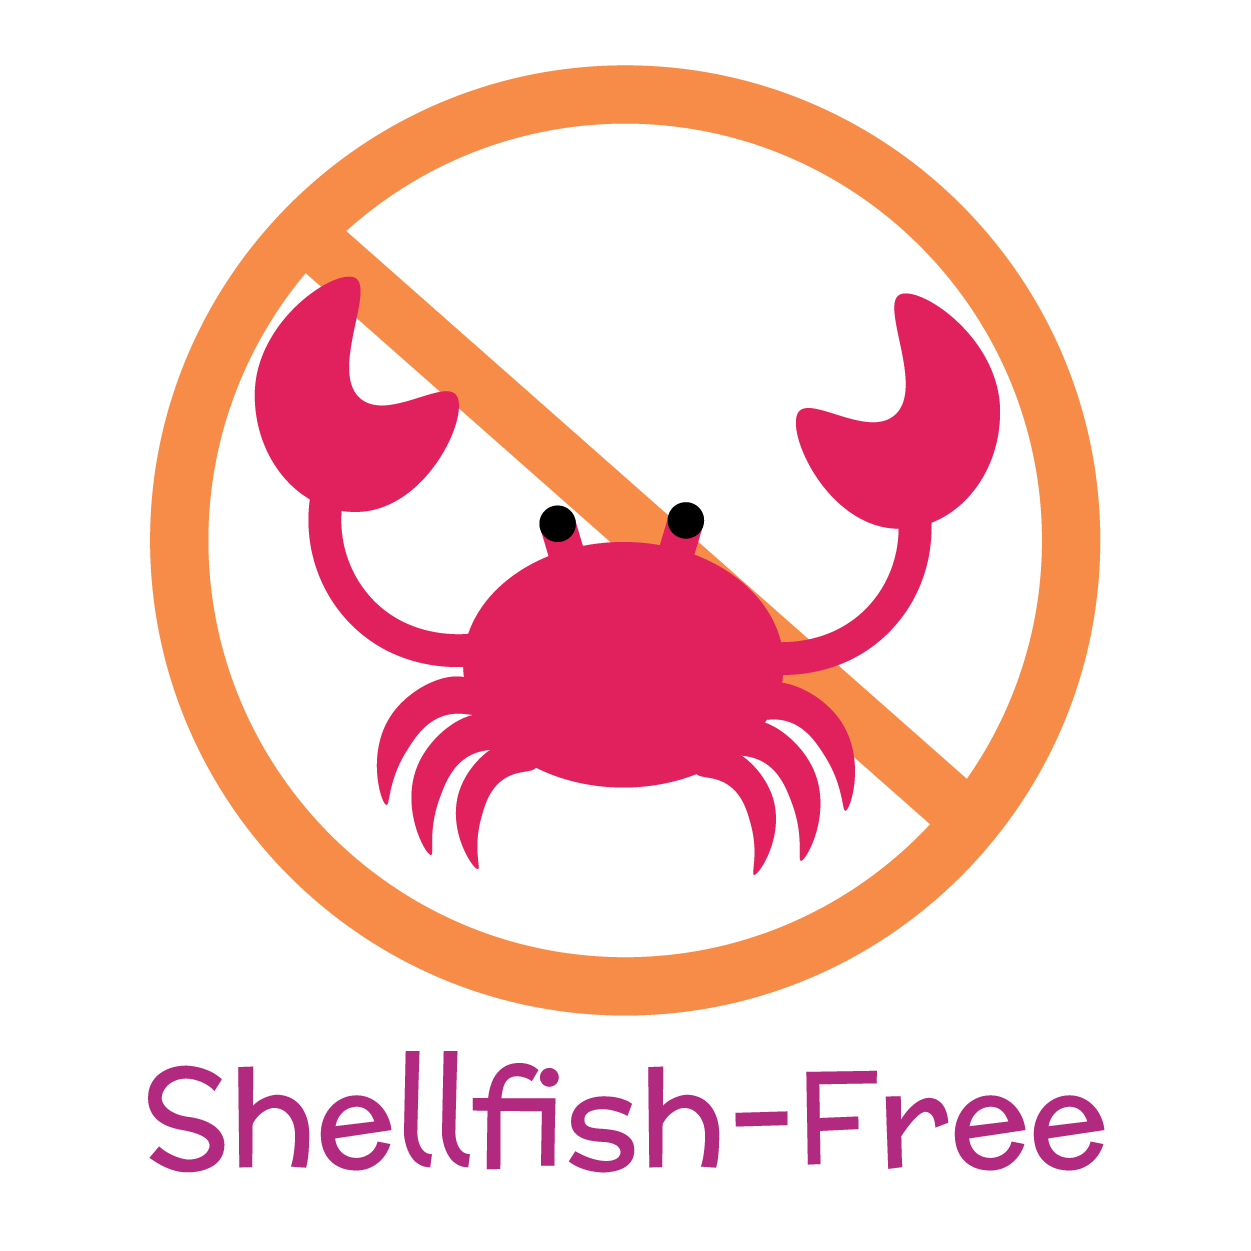 Copy of Copy of Copy of Copy of Copy of Copy of Copy of shellfish-free-nomster-chef